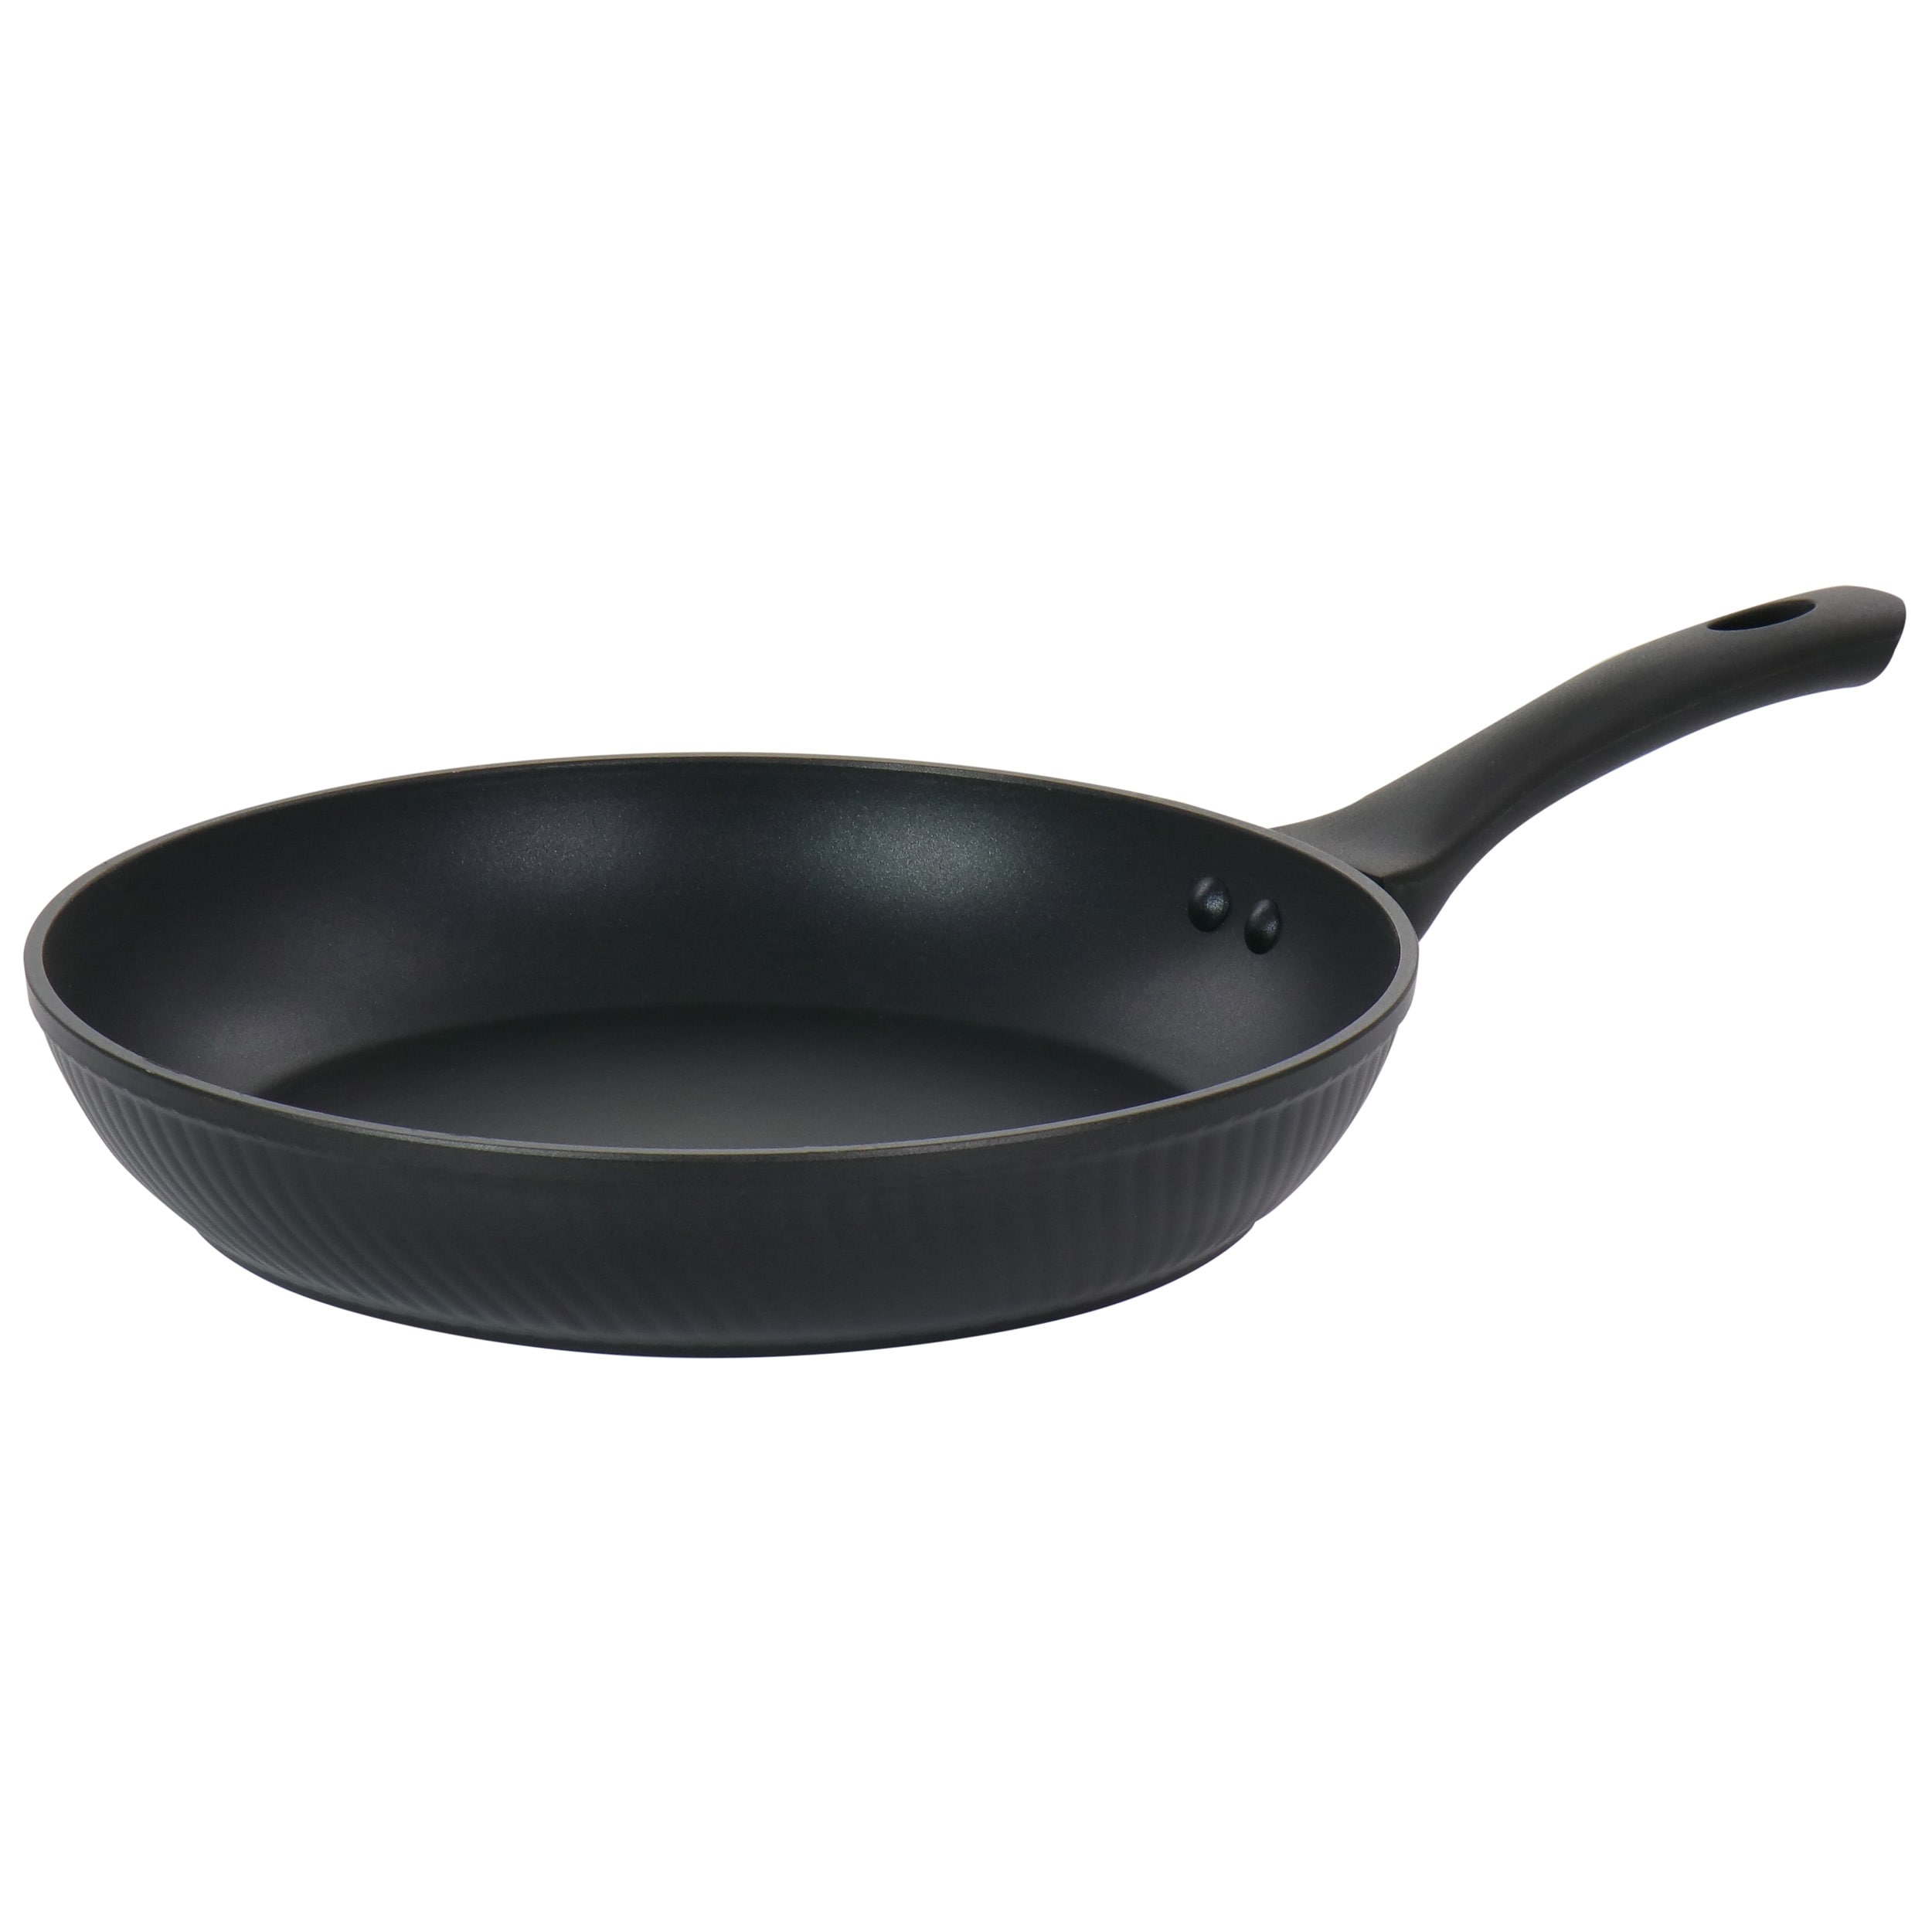 https://ak1.ostkcdn.com/images/products/is/images/direct/1c4ae8c5f23e7870cf865eec616e202ab64e81ac/Oster-Kono-11-Inch-Aluminum-Nonstick-Frying-Pan-in-Black.jpg